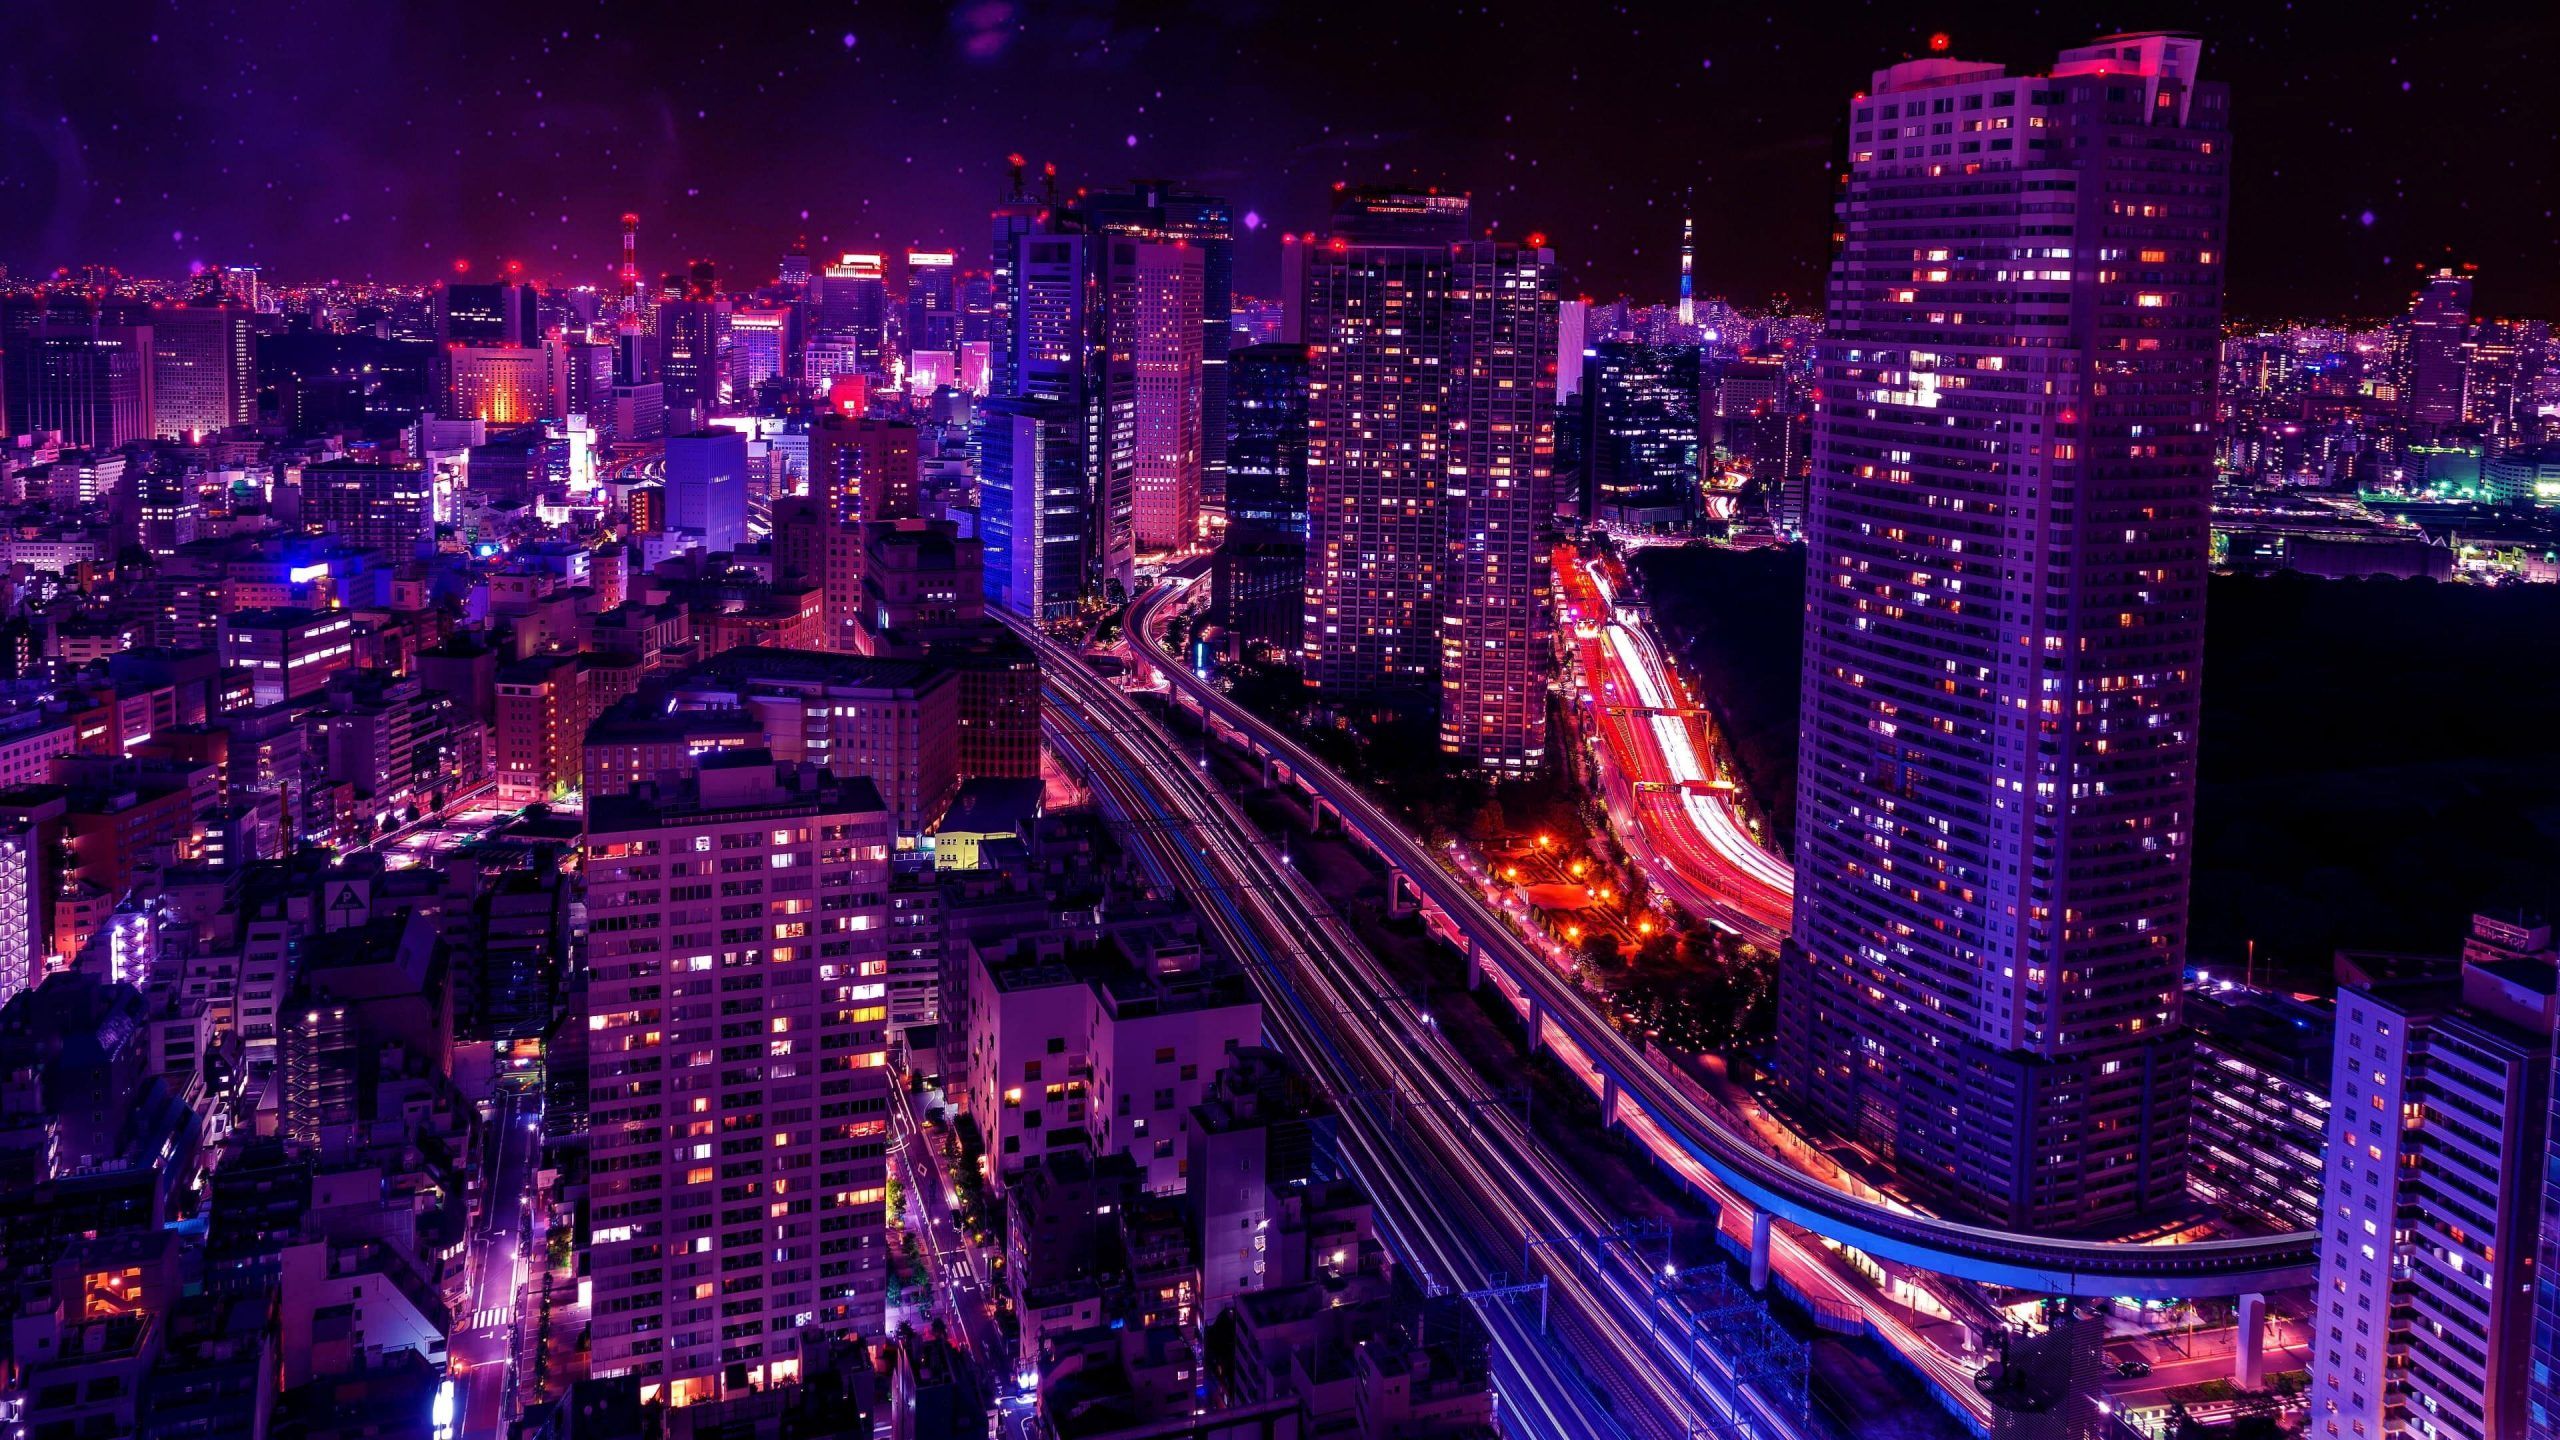 A city at night with purple lights and stars - Tokyo